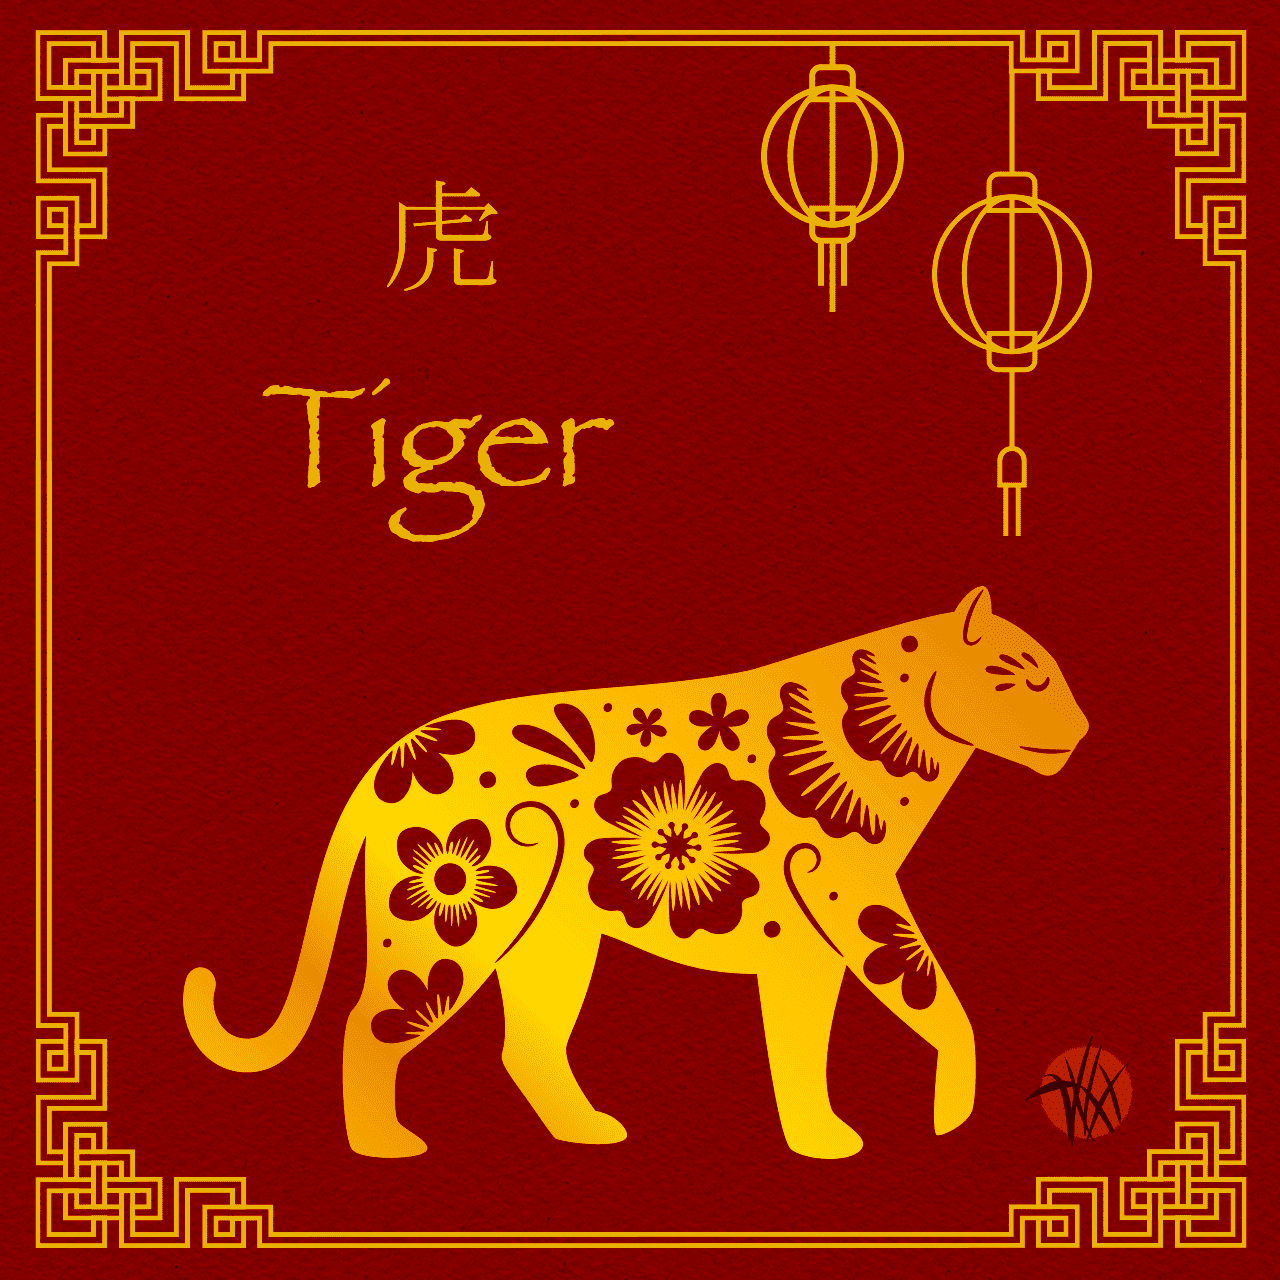 Zodiac animal: tiger. Red background with gold drawing of tiger